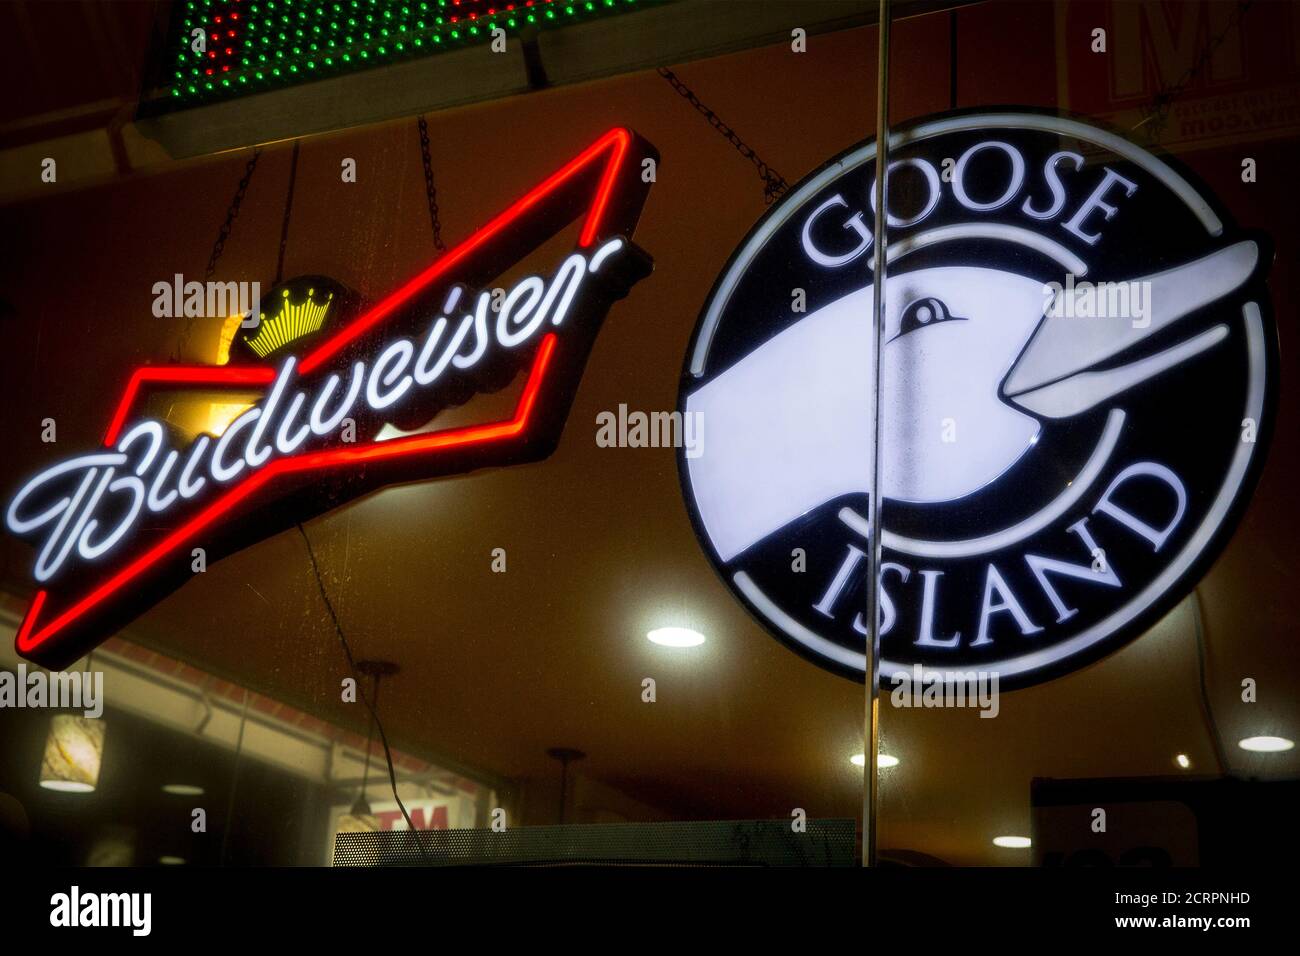 A Budweiser sign is displayed along side a sign for Goose Island beer at a store in Brooklyn, New York January 14, 2015.  Growth of AB InBev's Shock Top and Goose Island had slowed sharply since national roll-outs, in the case of Shock Top to a high single-digit percentage last year, compared to an average rate of 15-17 percent for a craft beer, Chris Shepard, assistant editor at Beer Marketer's Insights said.  Picture taken January 14, 2015.      REUTERS/Brendan McDermid    (UNITED STATES - Tags: BUSINESS) Stock Photo